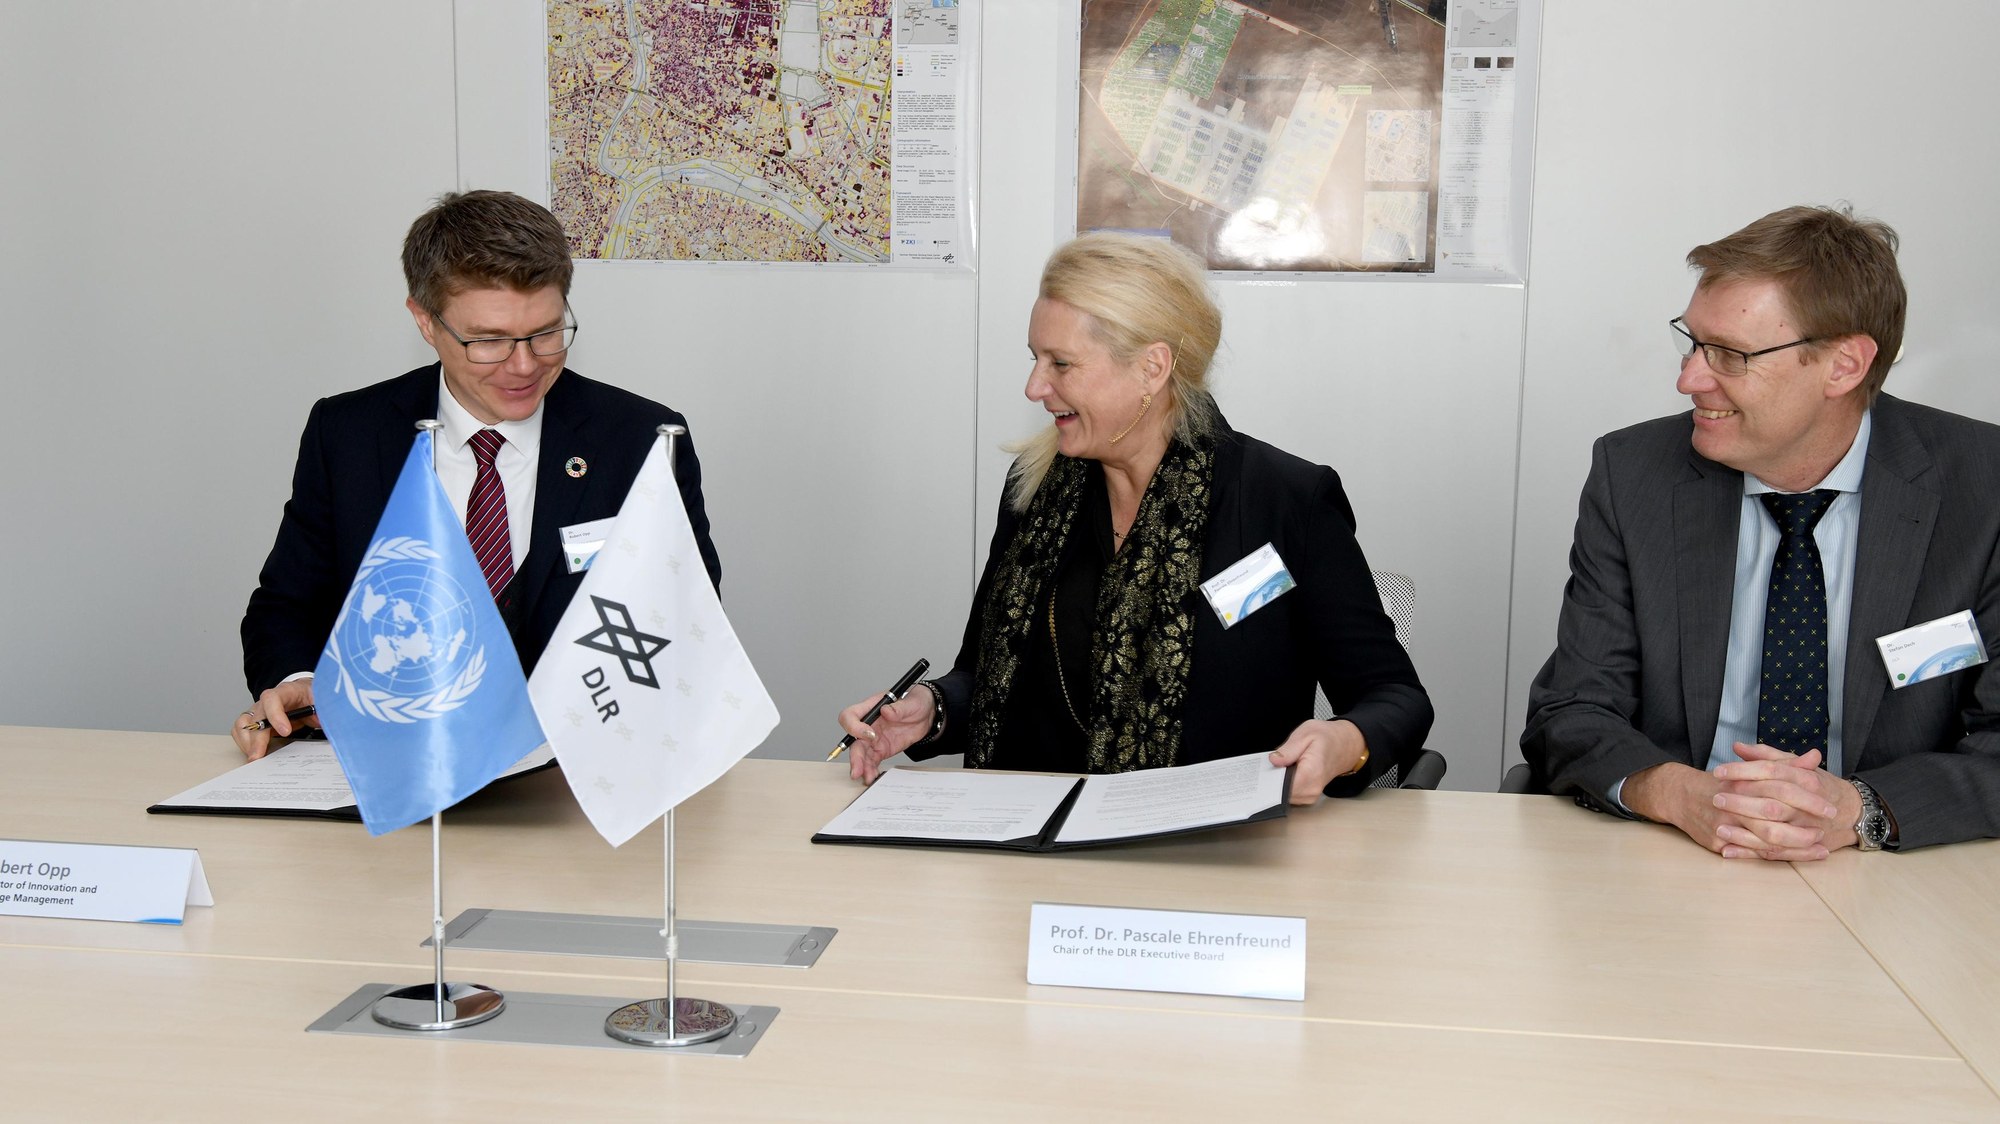 UN World Food Programme and DLR sign an agreement